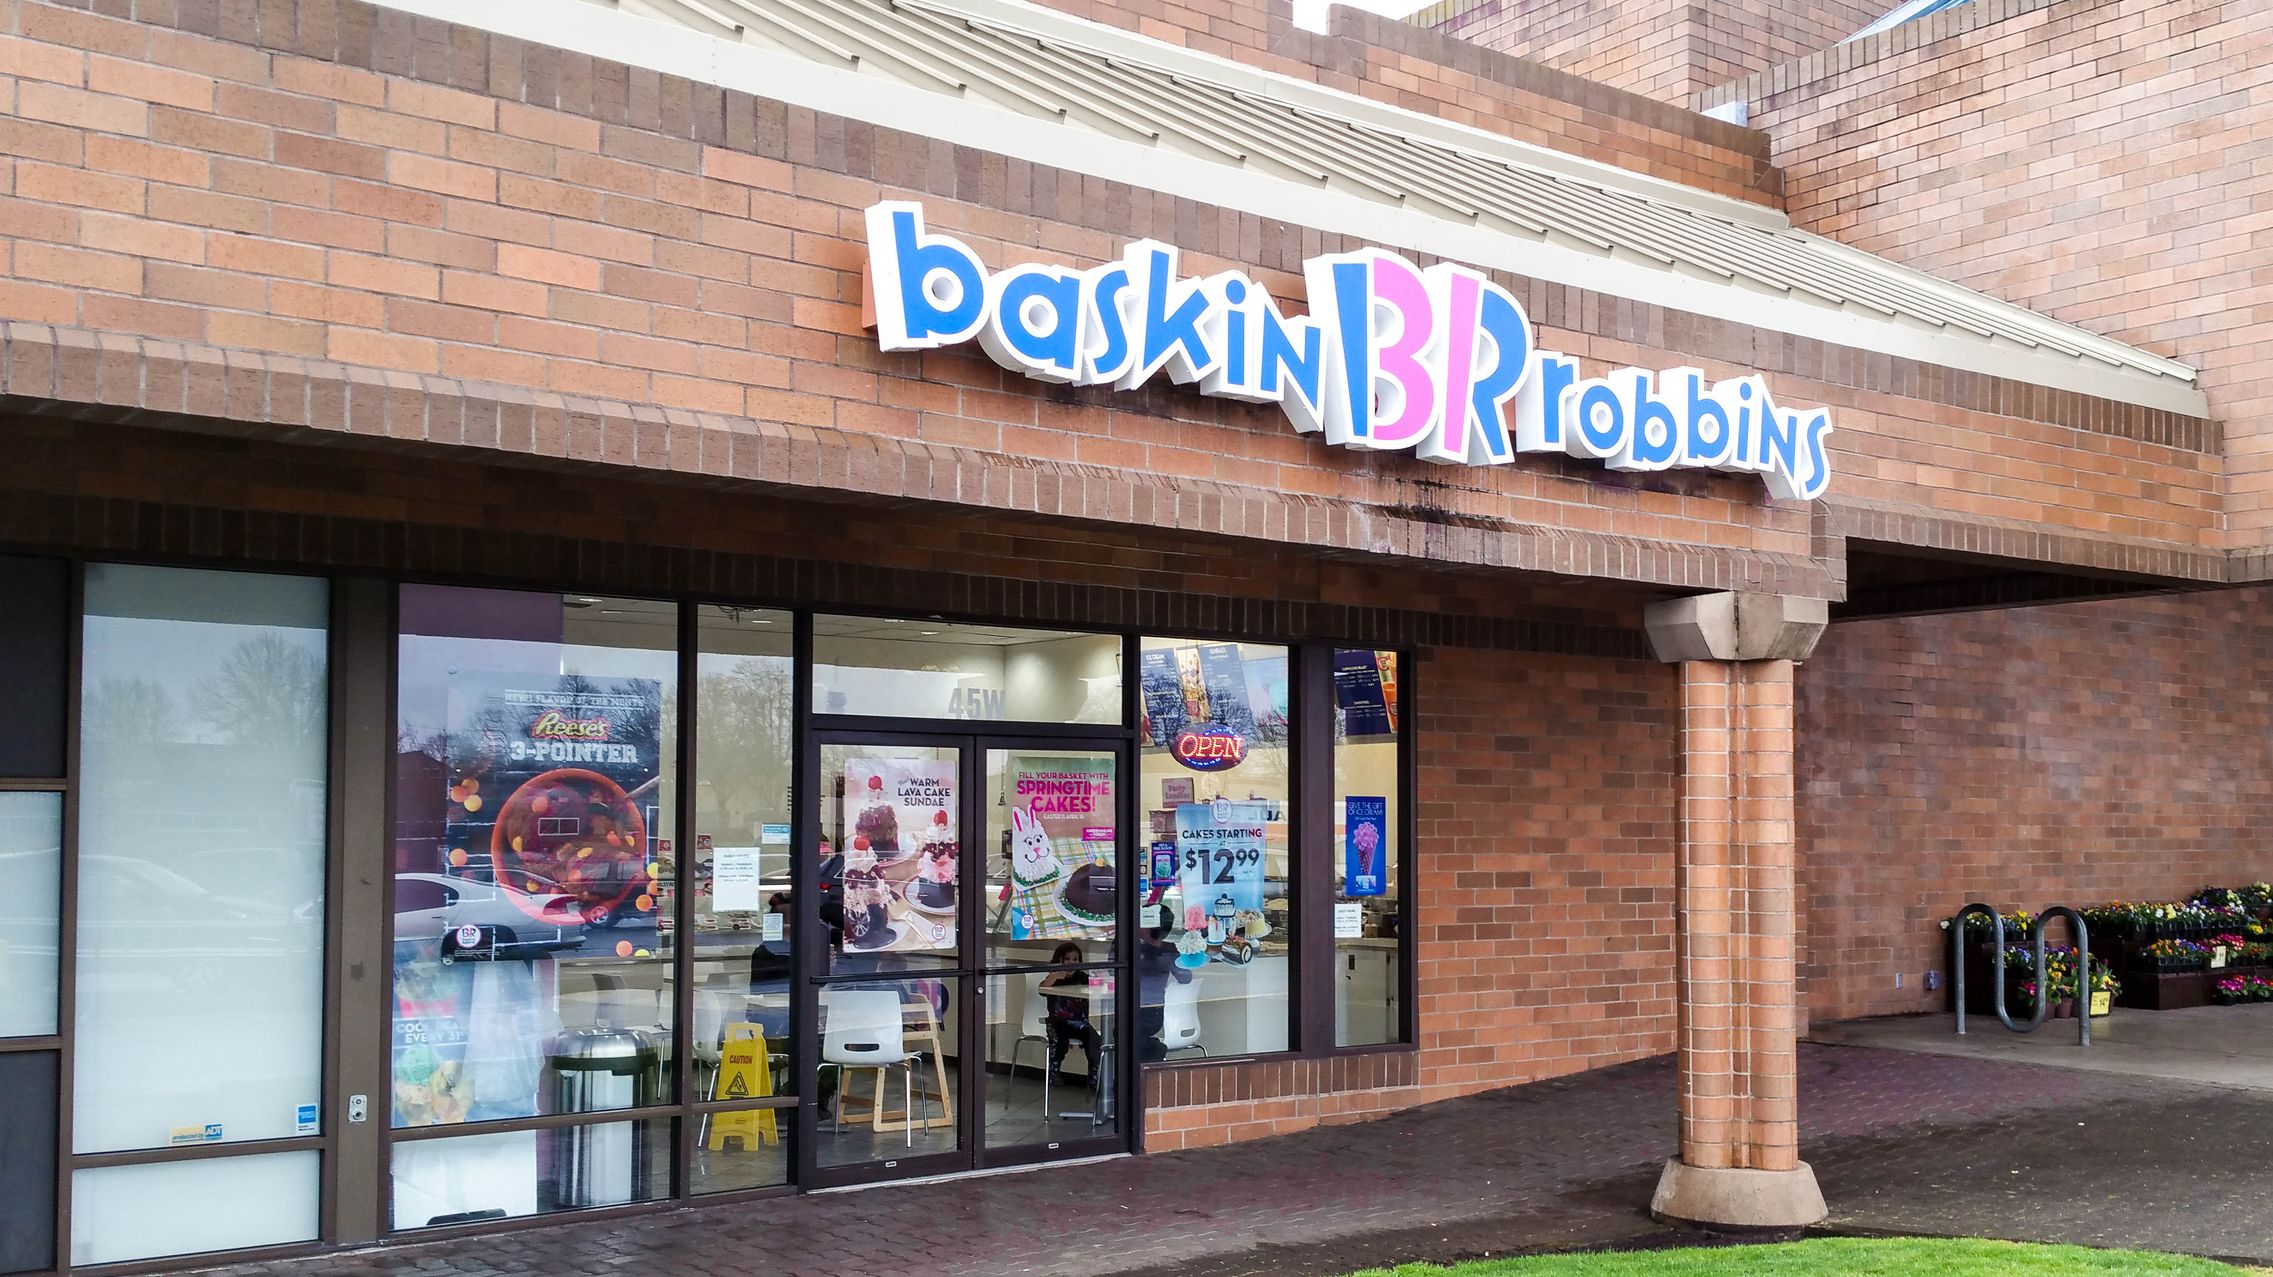 14-single-scoops-you-didn-t-know-about-baskin-robbins-mental-floss